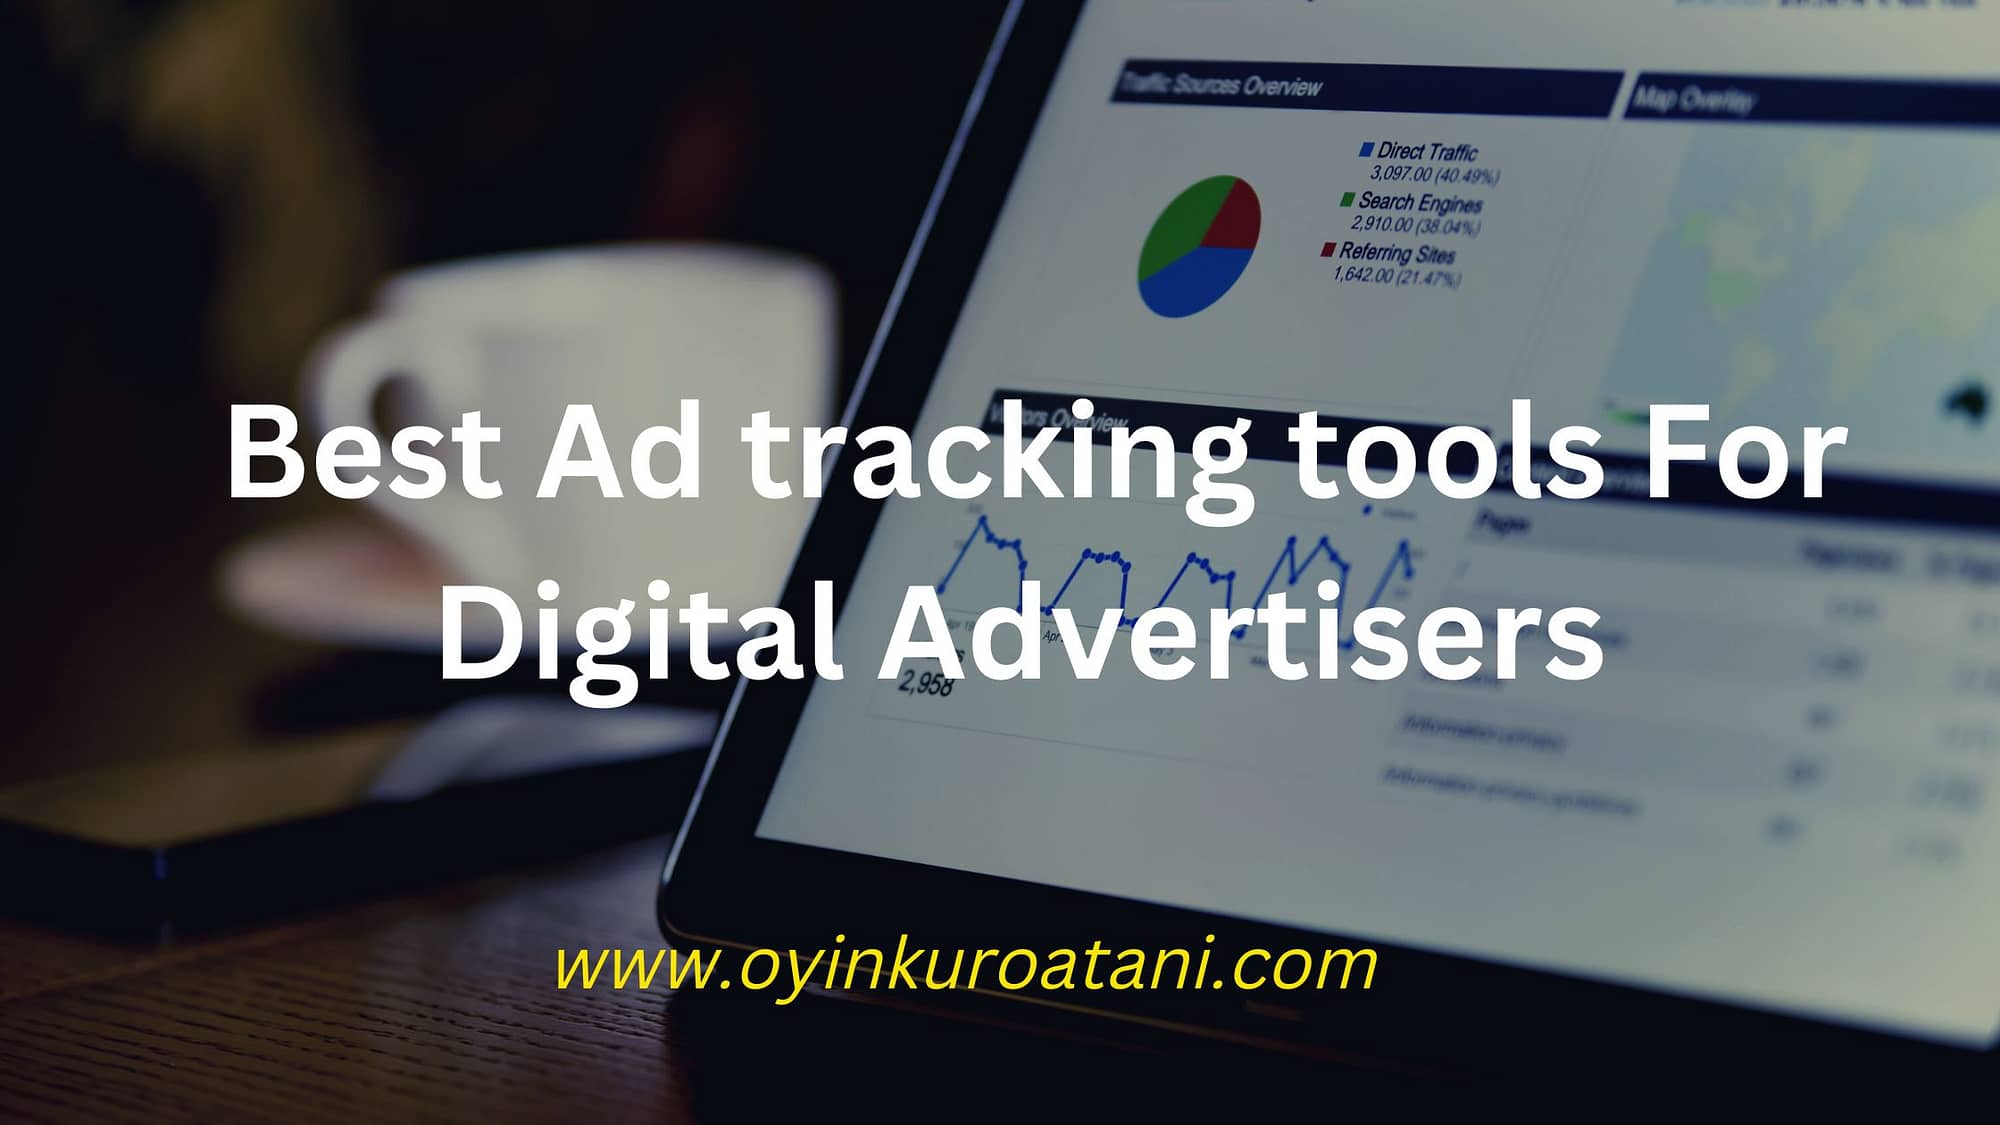 Best Ad tracking tools For Digital Advertisers